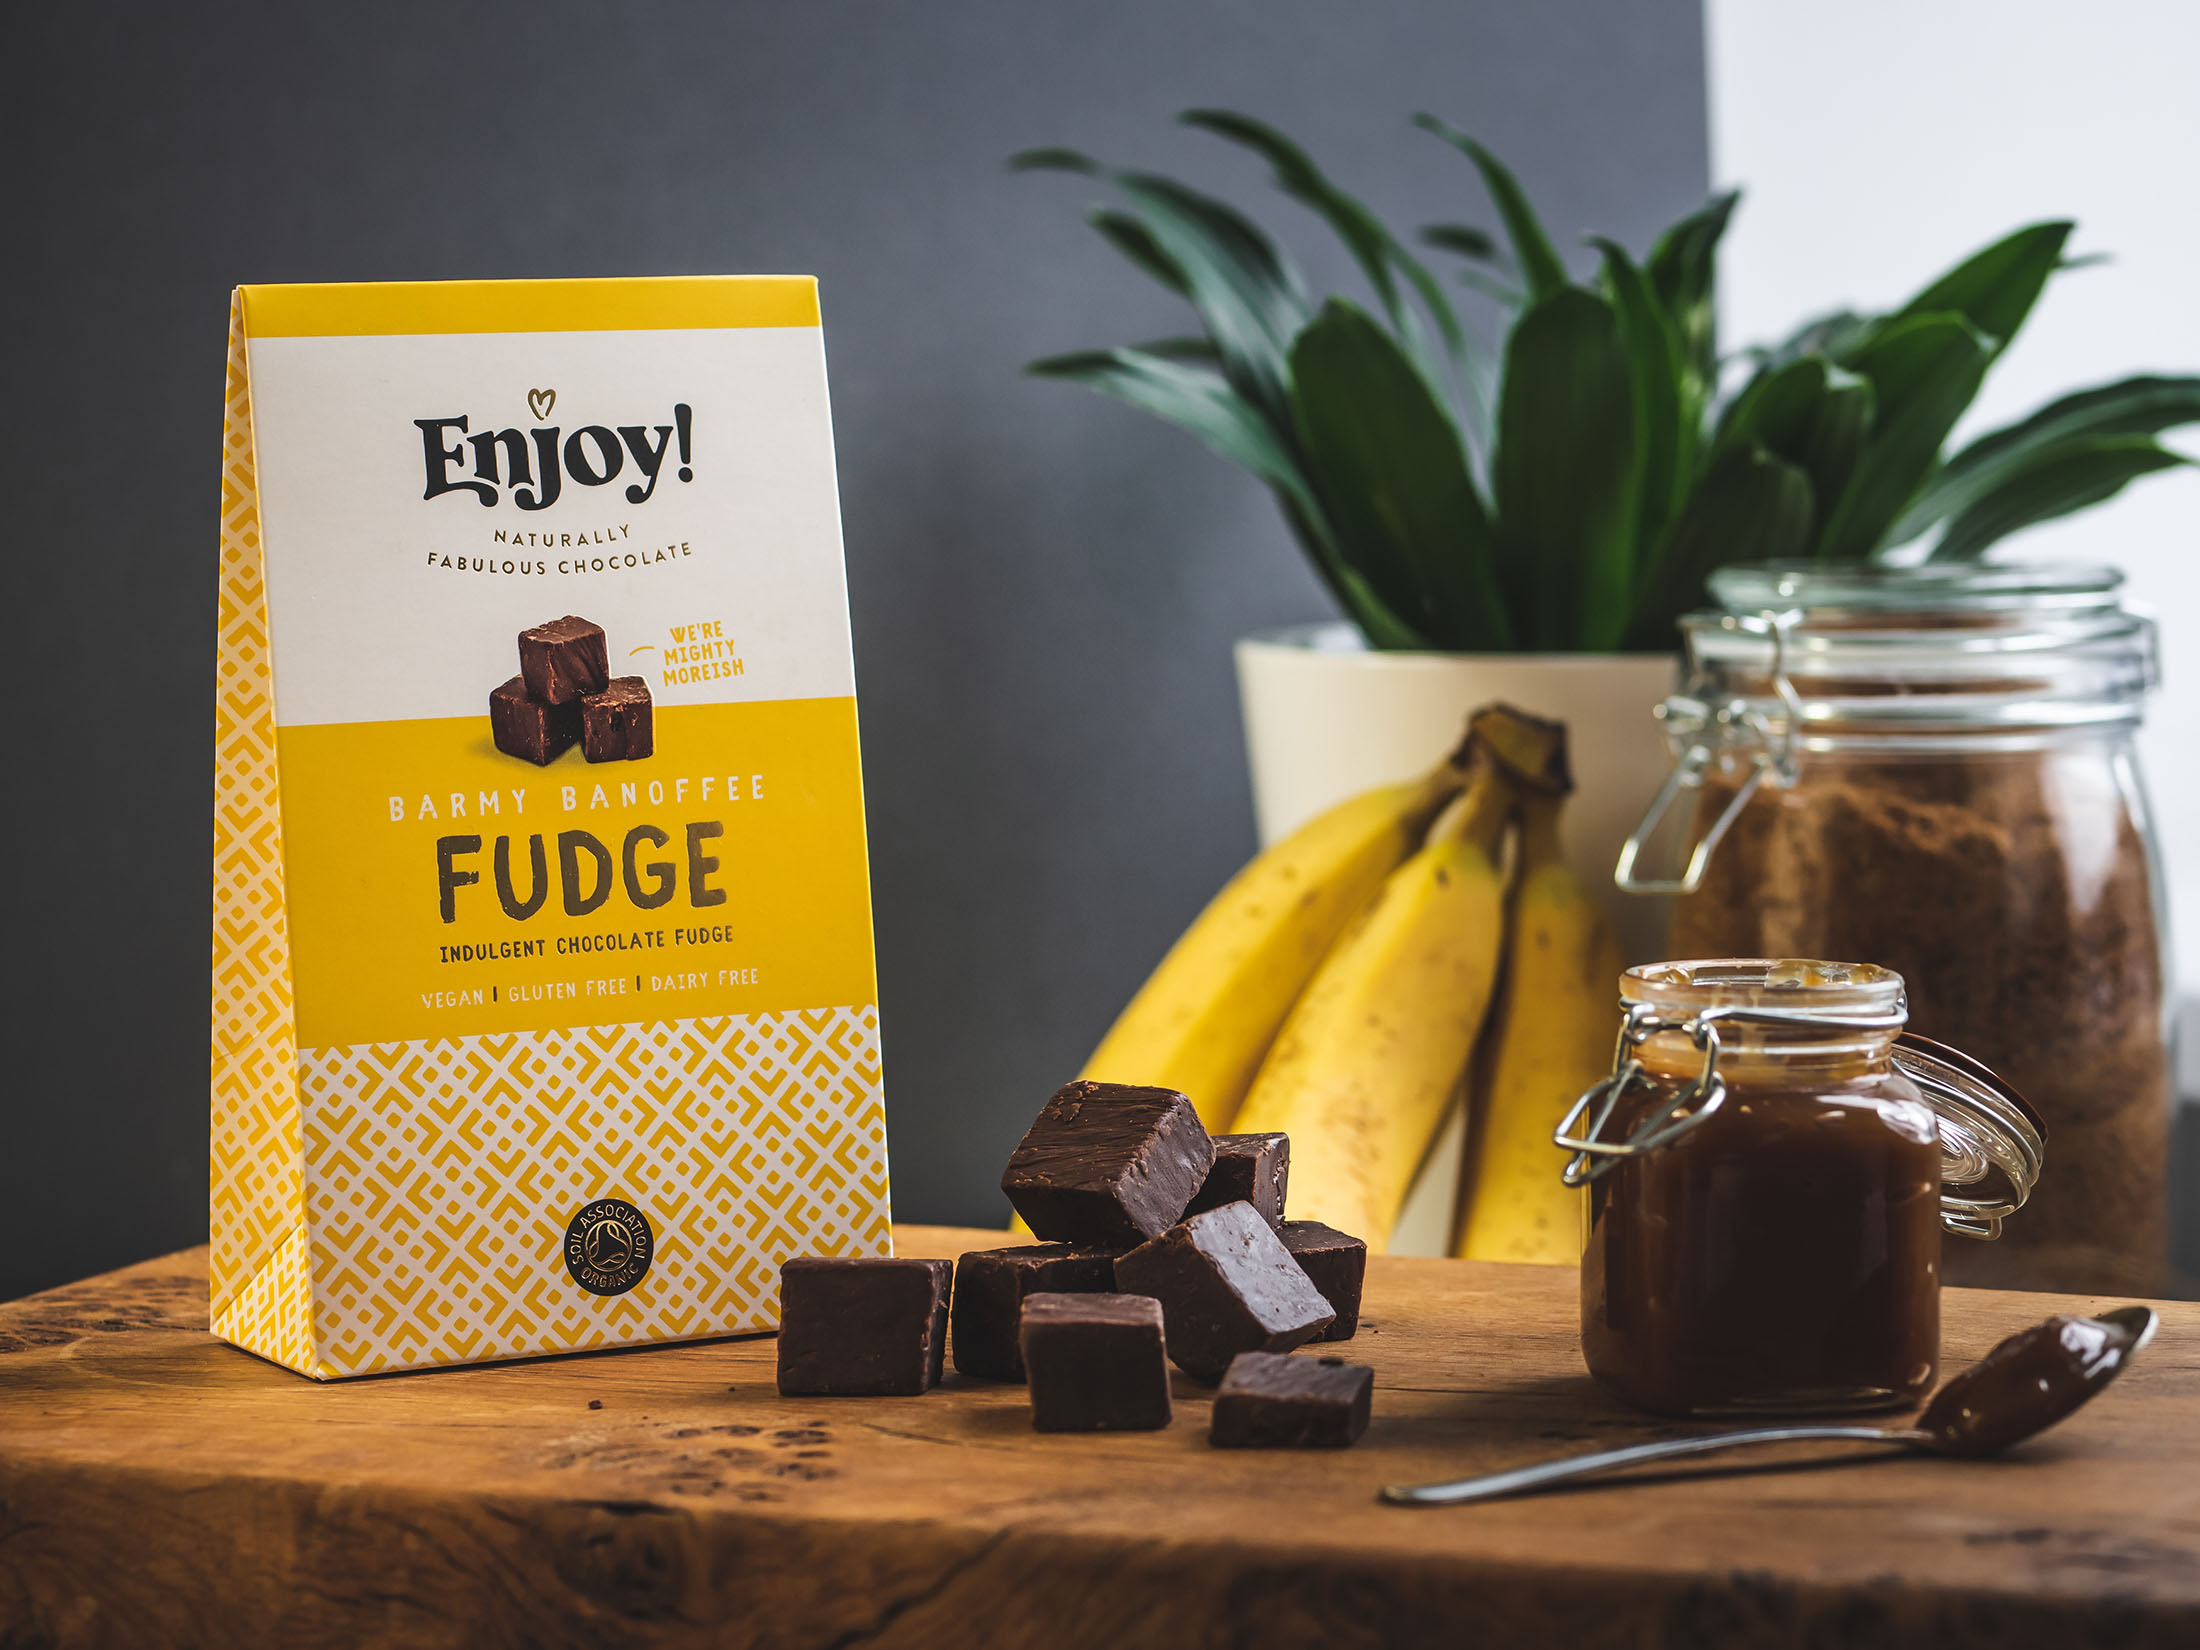 Enjoy! The brand new free-from chocolates giving us a sweet tooth - Barmy Banoffee Fudge